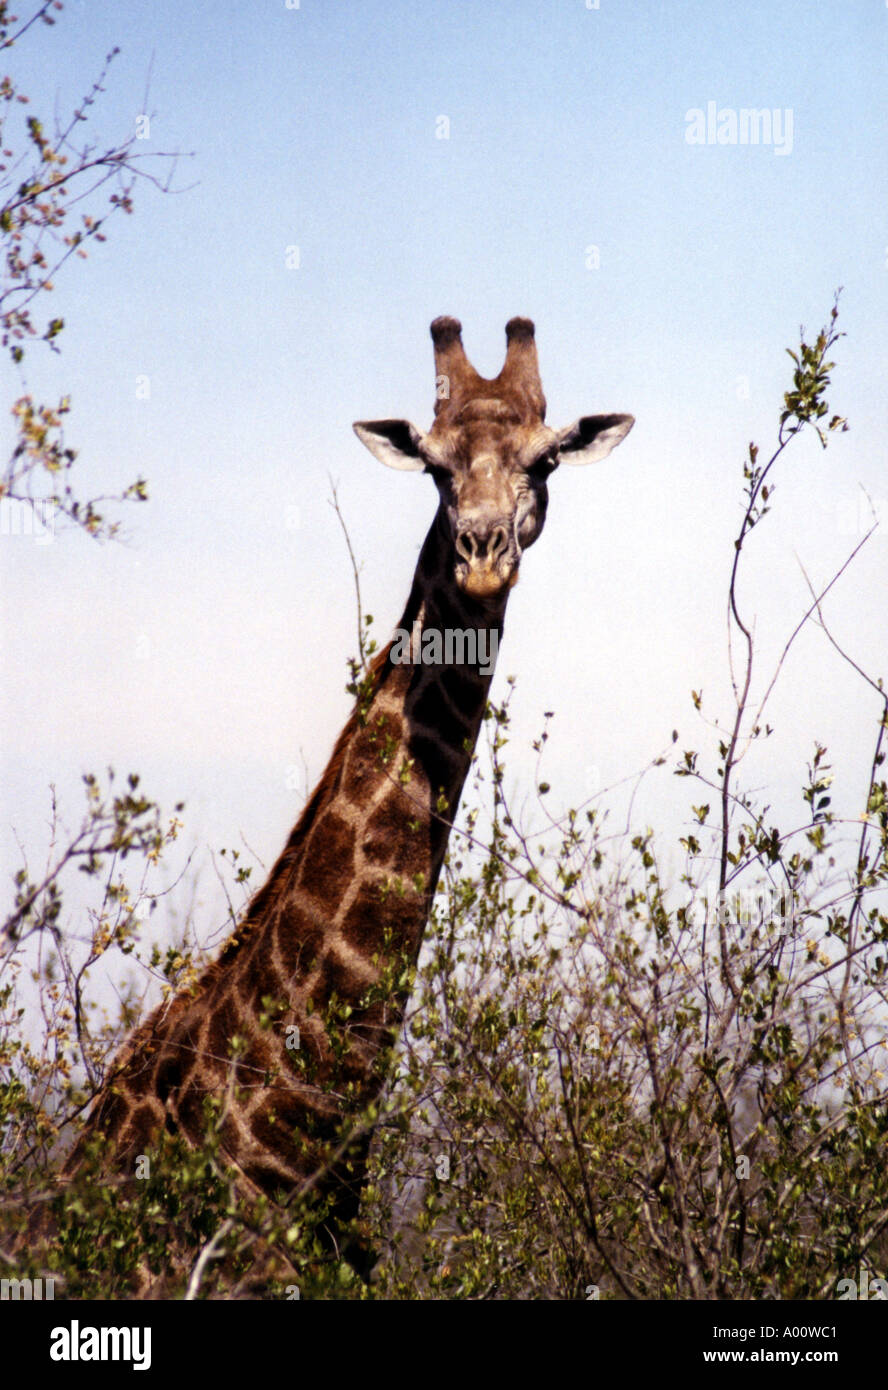 Giraffe neck and head against blue sky Kruger NP South Africa Stock Photo